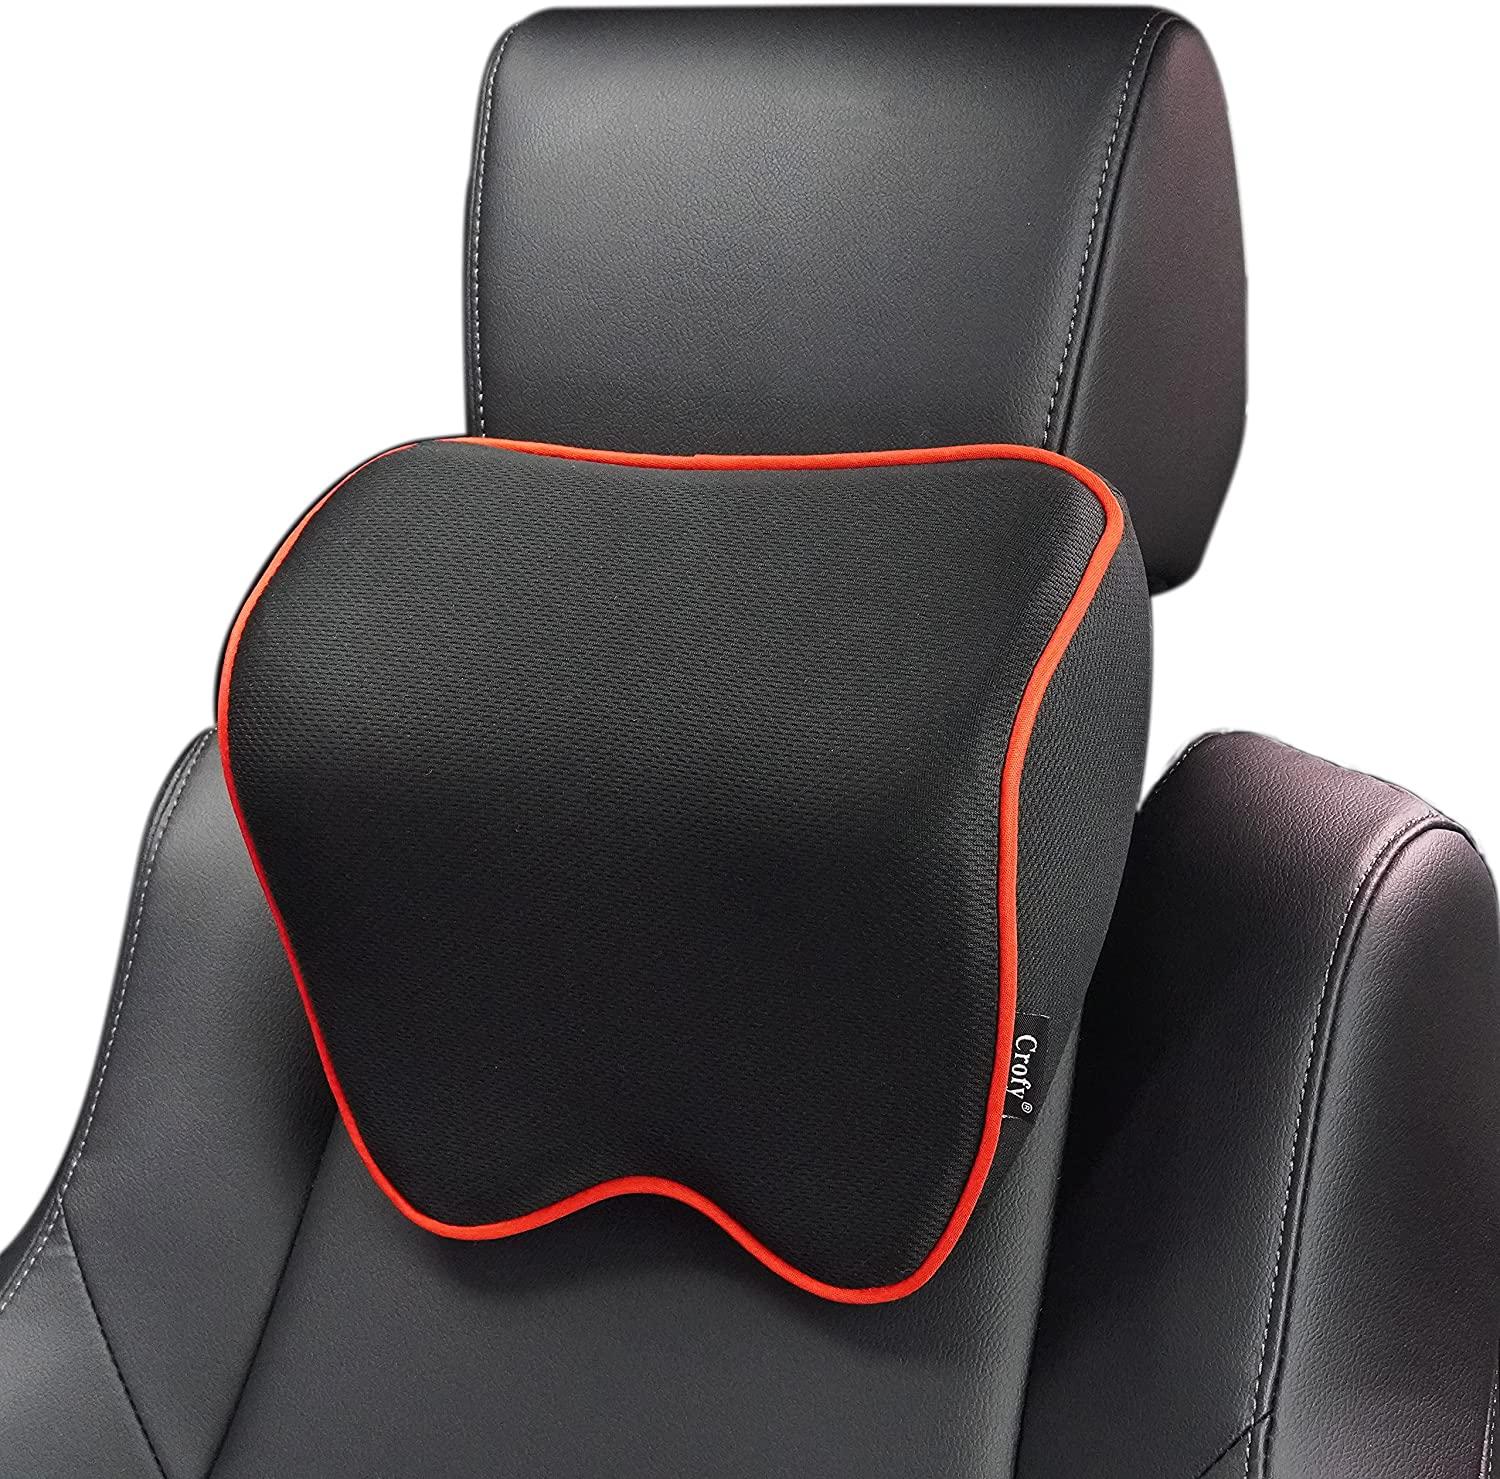 2Pcs TK002 Memory Foam Car Lumbar Support Back Cushion and Headrest Neck  Pillow Set for Car Seat Office Chair - Black Leather/Red Line Wholesale